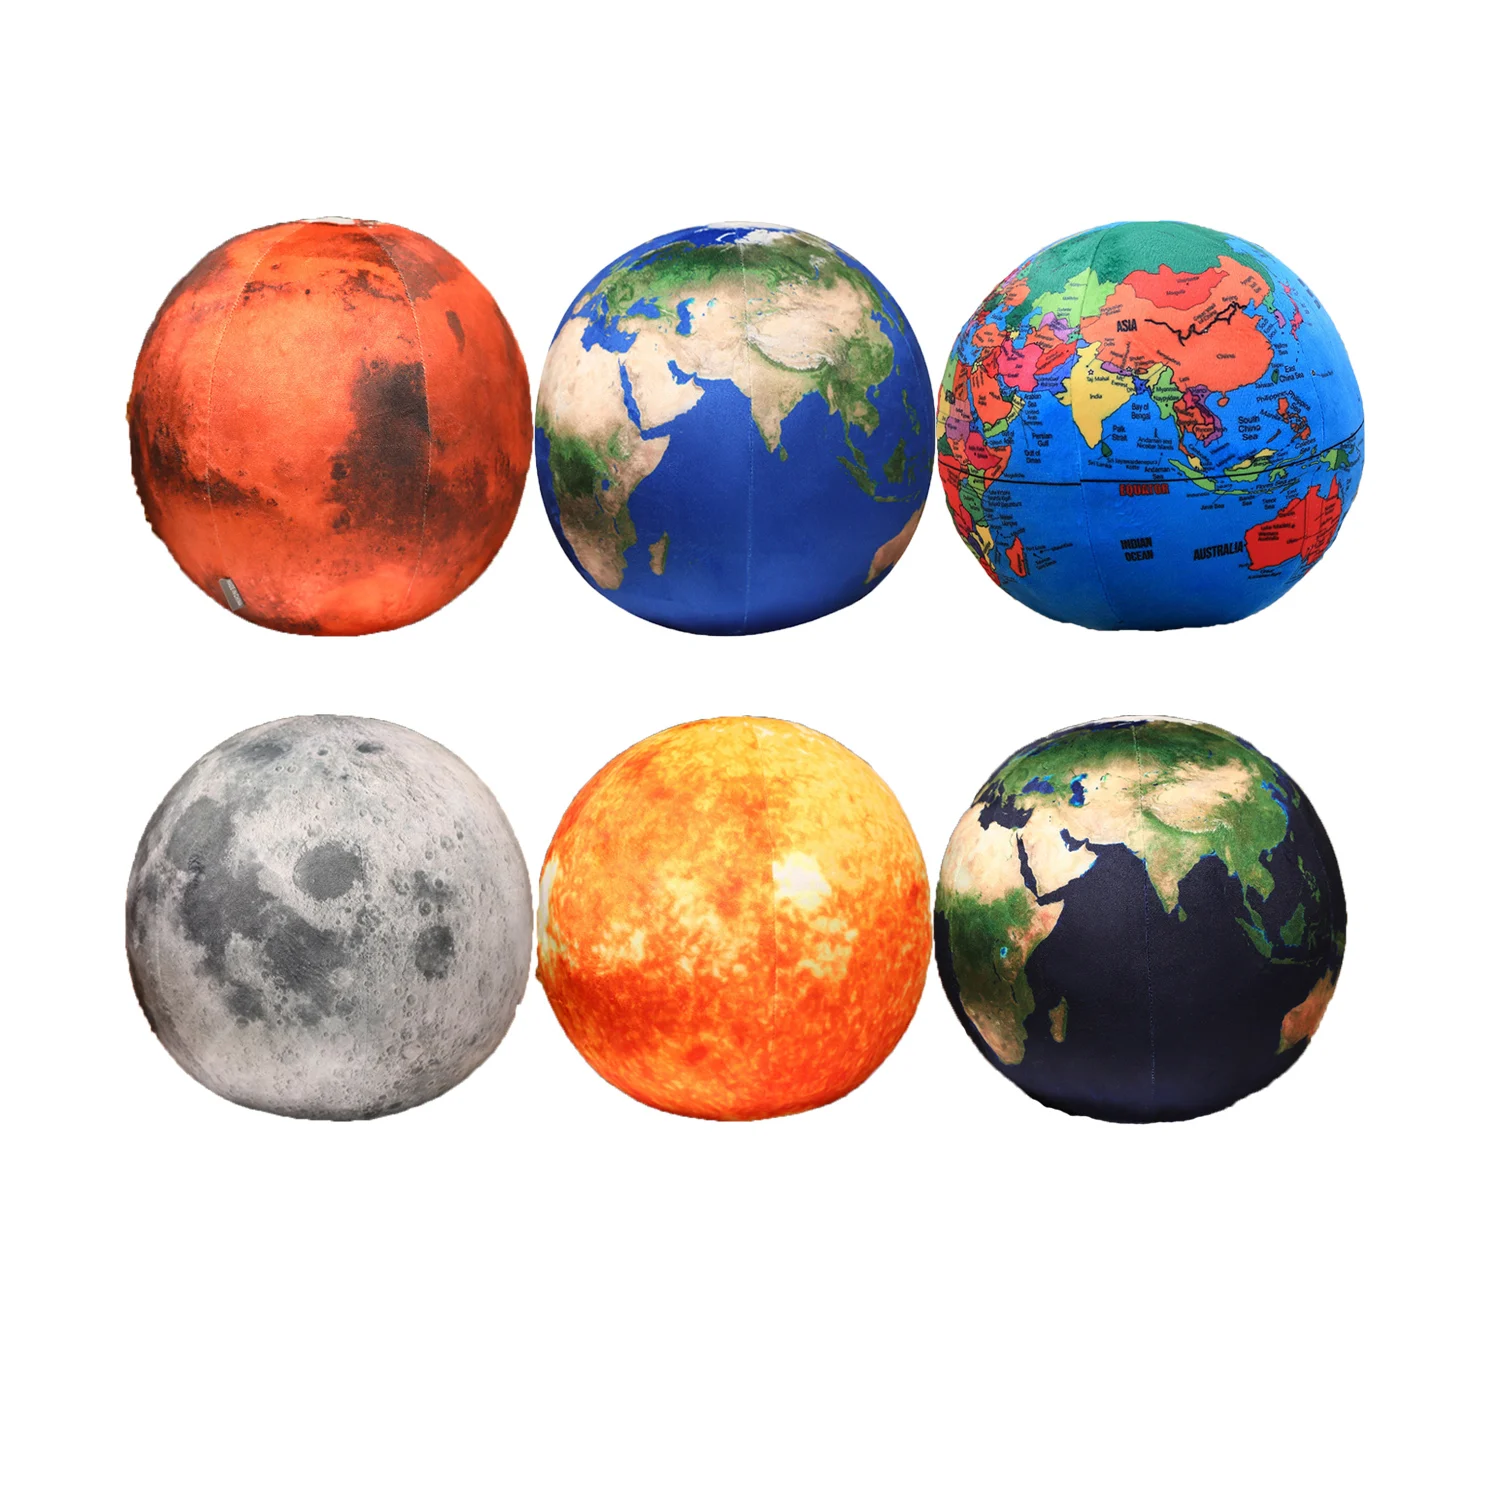 

Solar System Fixed Star Plush Toys Simulated Sun Earth Moon Mars Planet Throw Pillow Educational Gifts for Kids Boys Room Decor